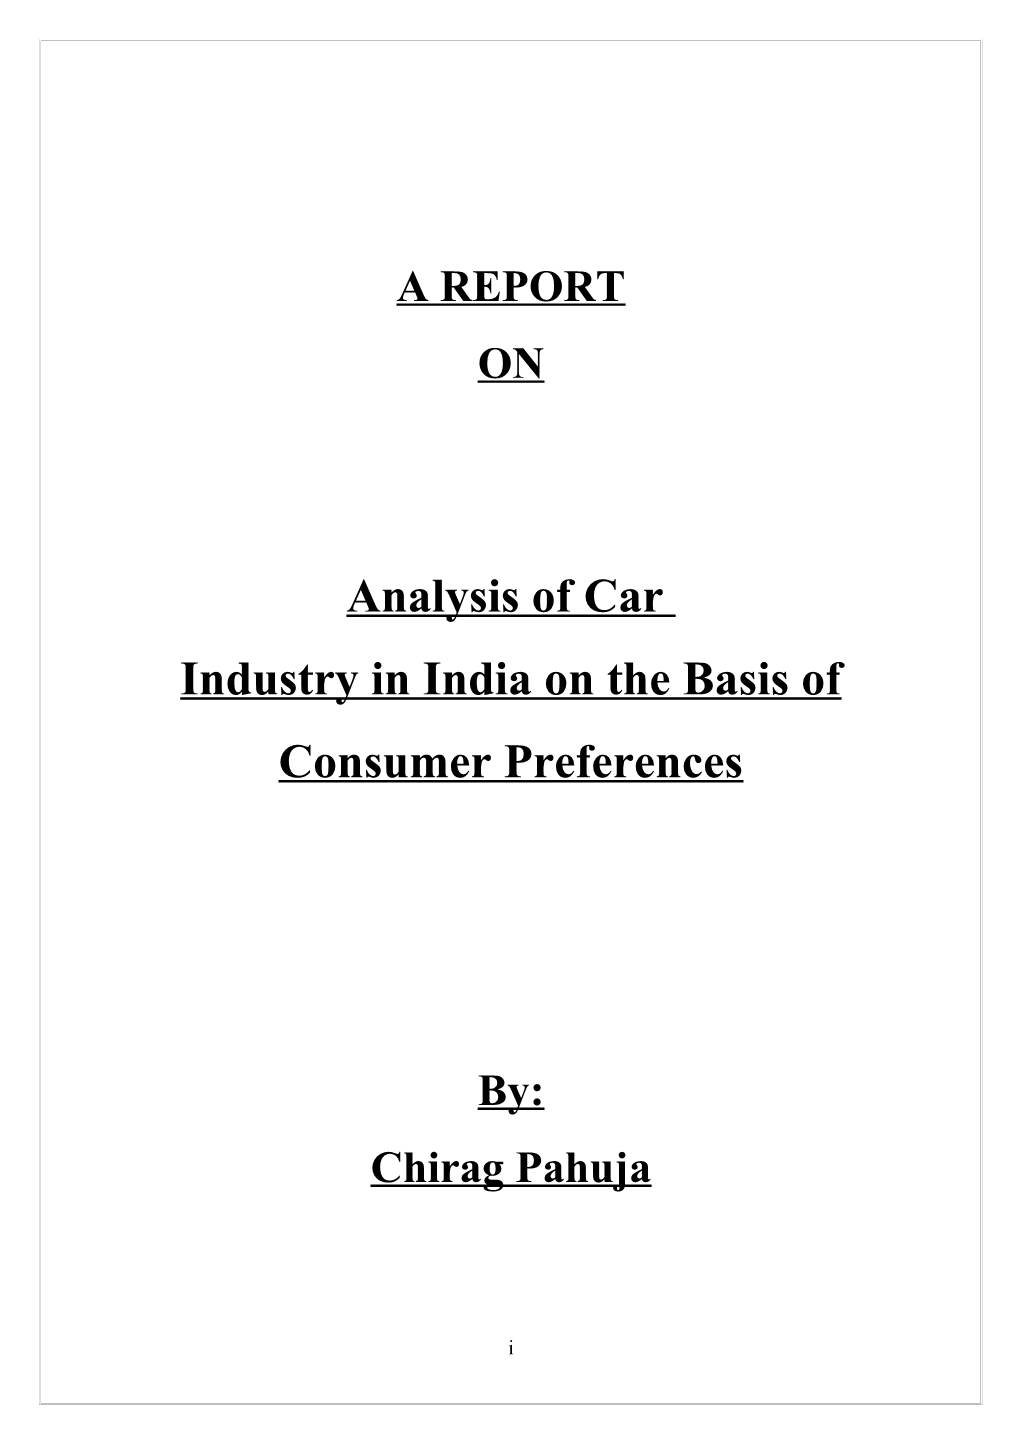 Industry in India on the Basis of Consumer Preferences